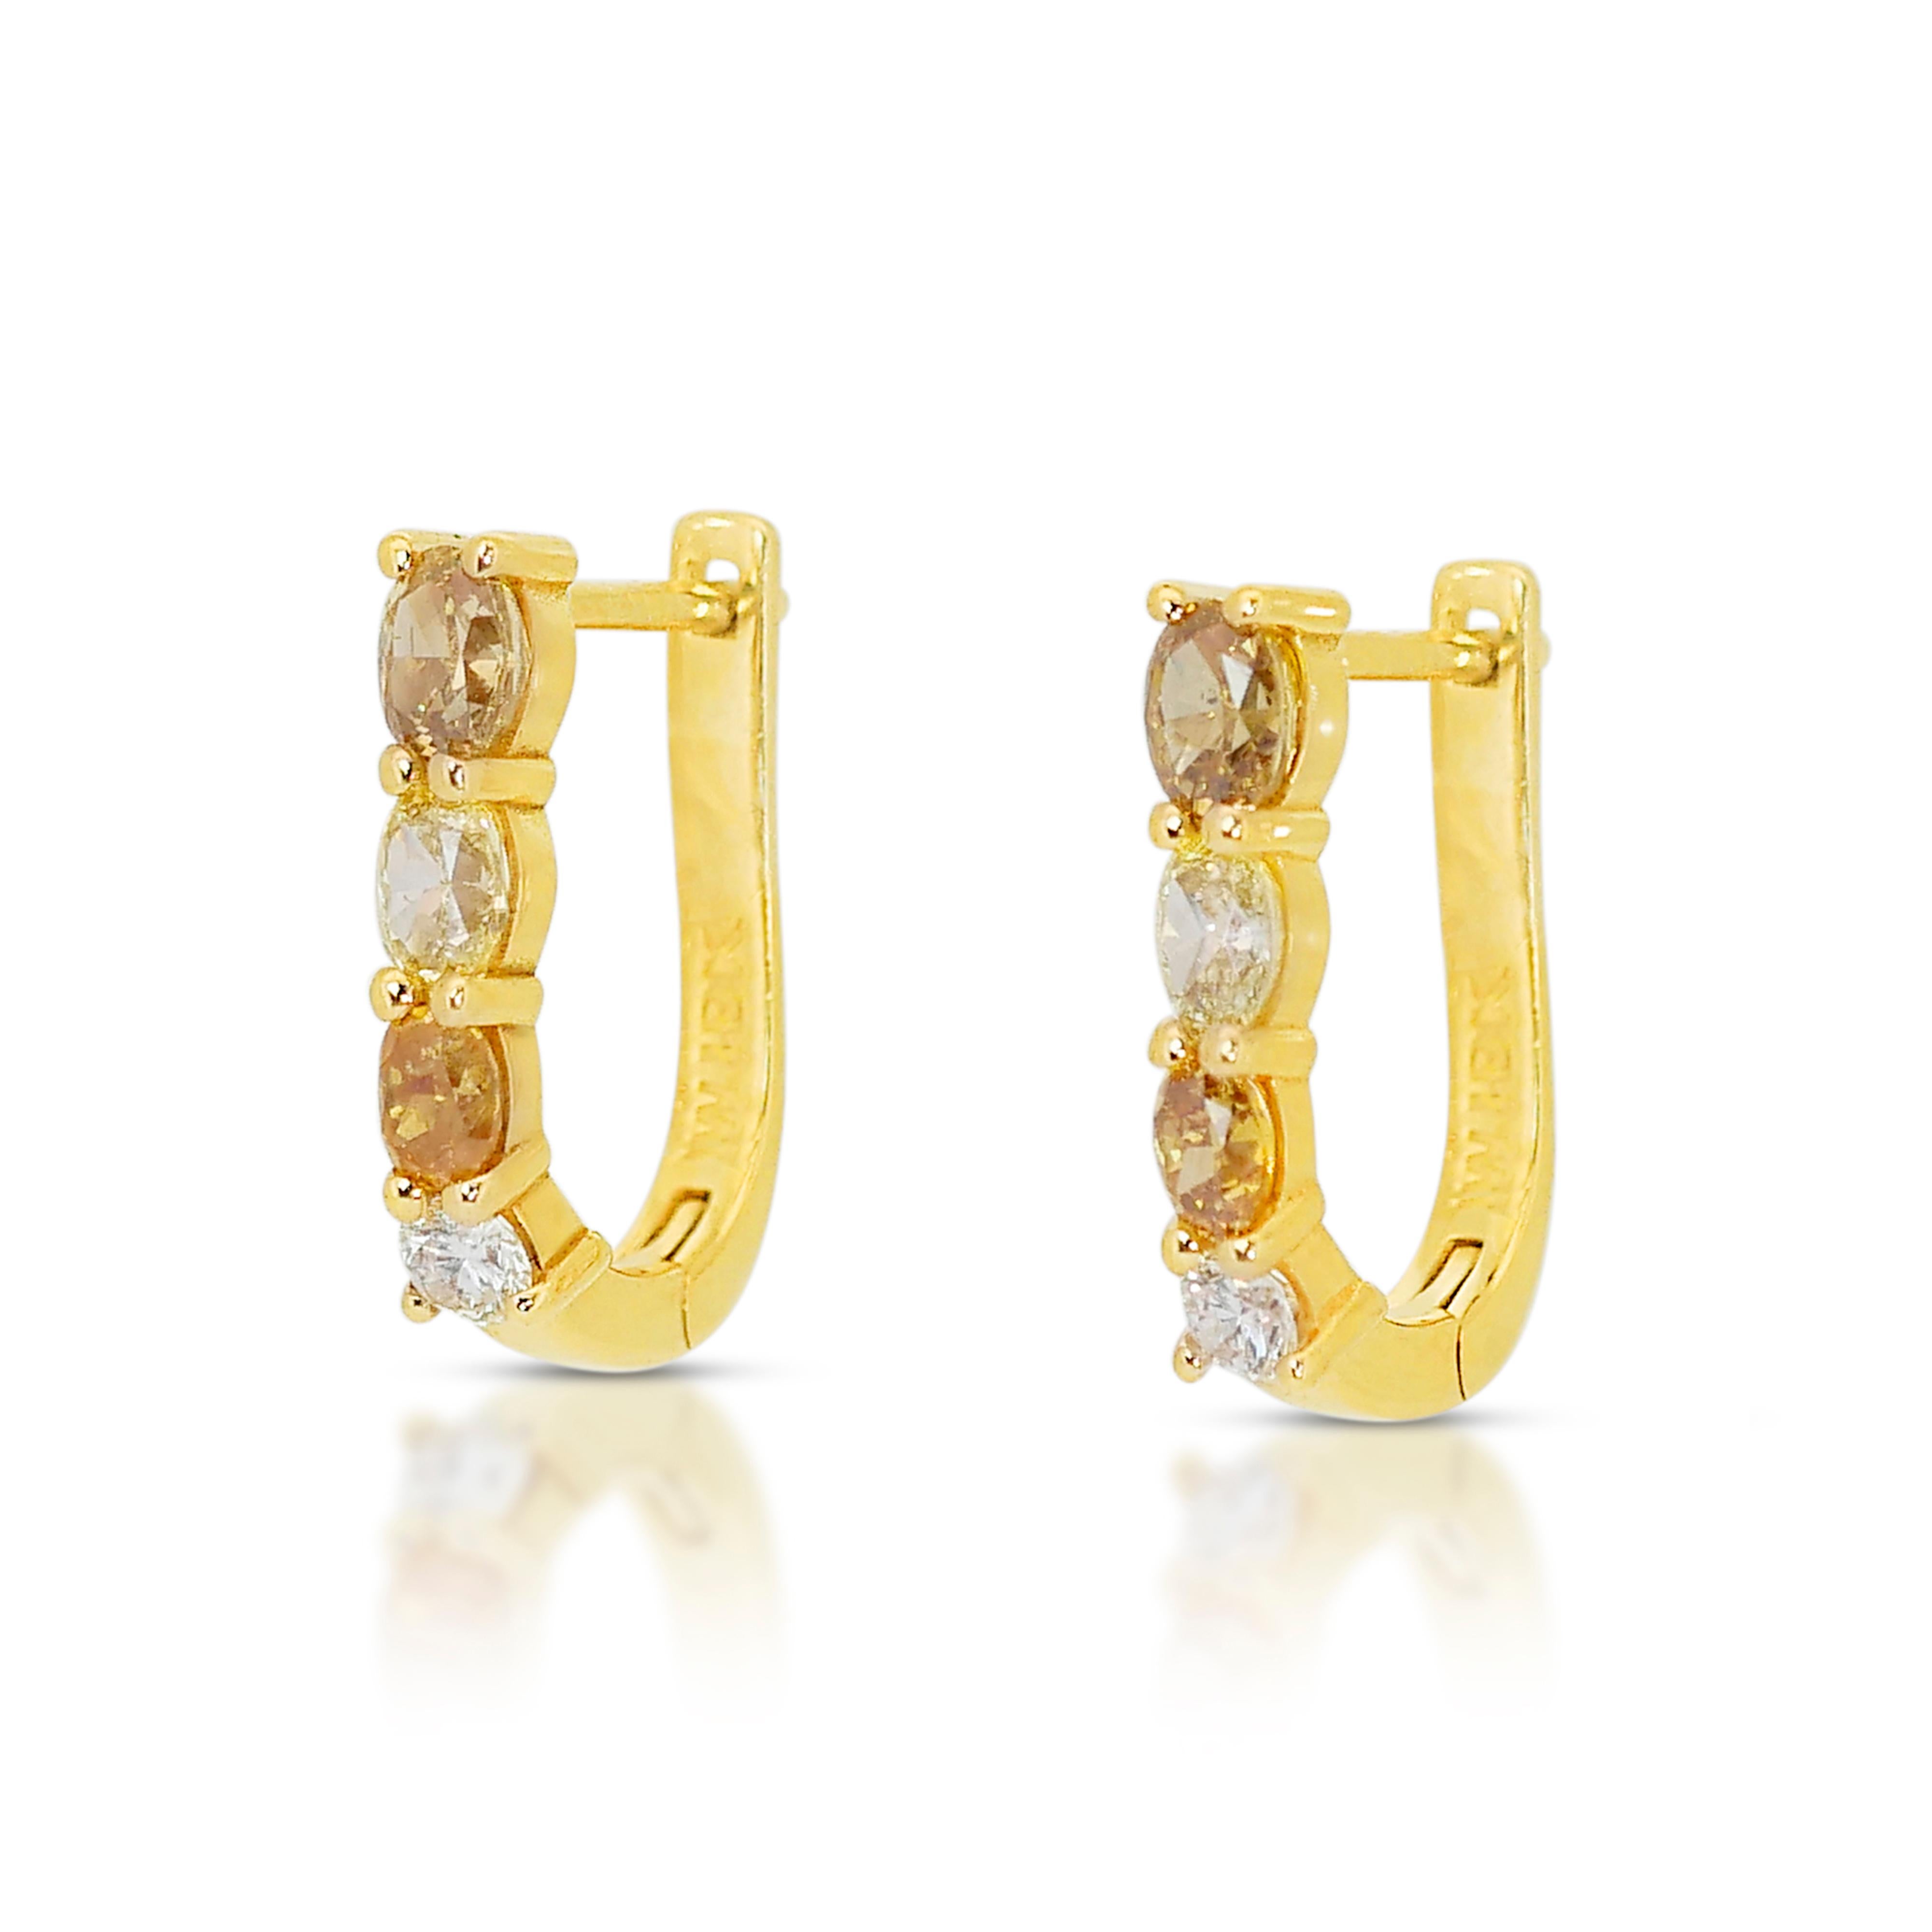 Round Cut Radiant 1.44 ct Fancy Colored Diamond Earrings in 18k Yellow Gold - IGI  For Sale